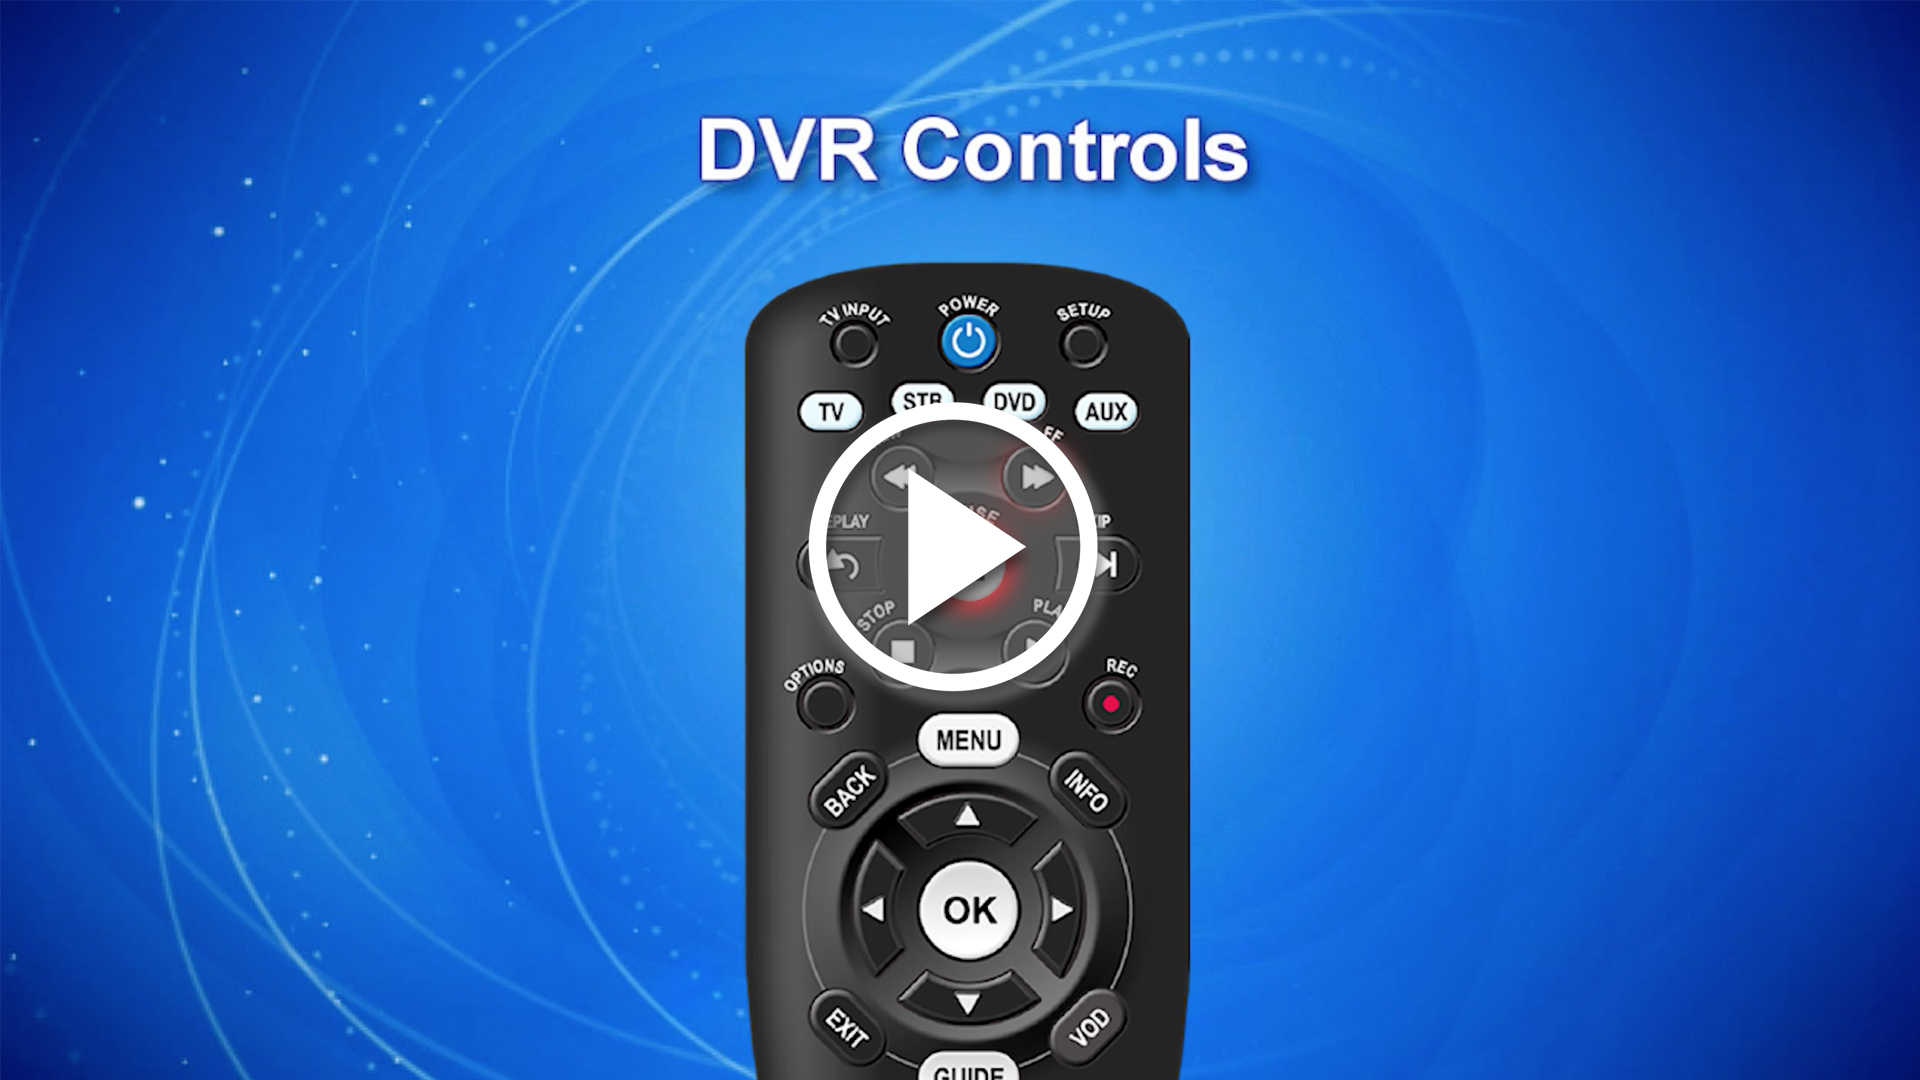 Controlling live TV video